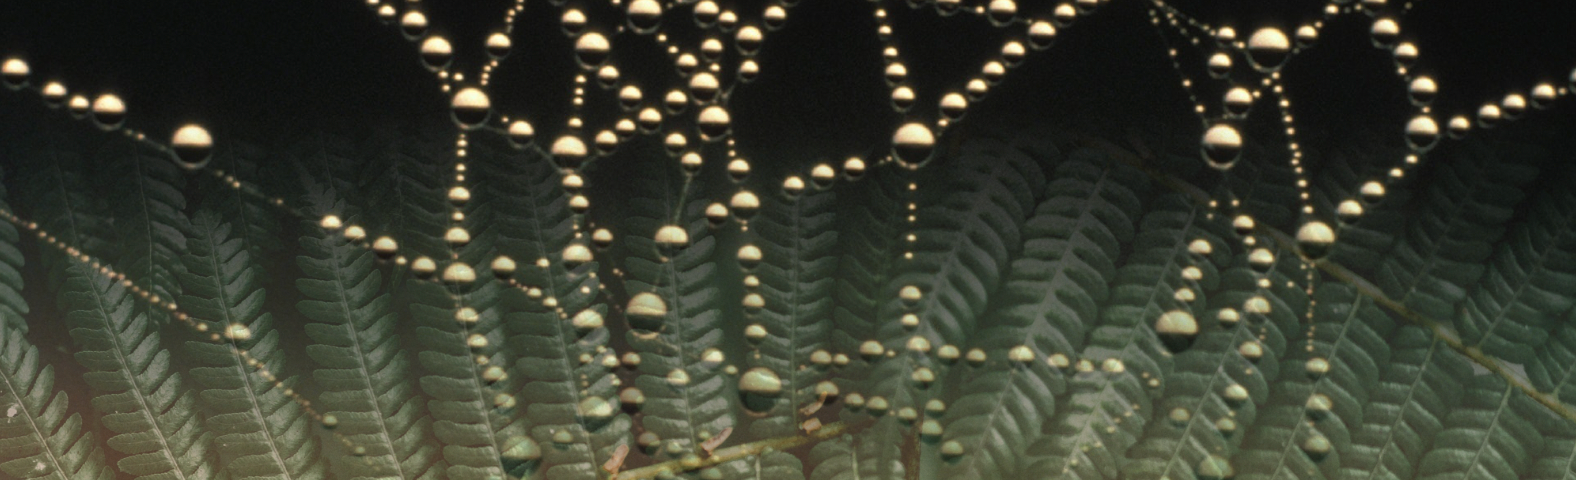 On a black background, a glistening spiderweb bejewelled with golden droplets of water sits at the top of the image, fading into fern-like leaves at the bottom.